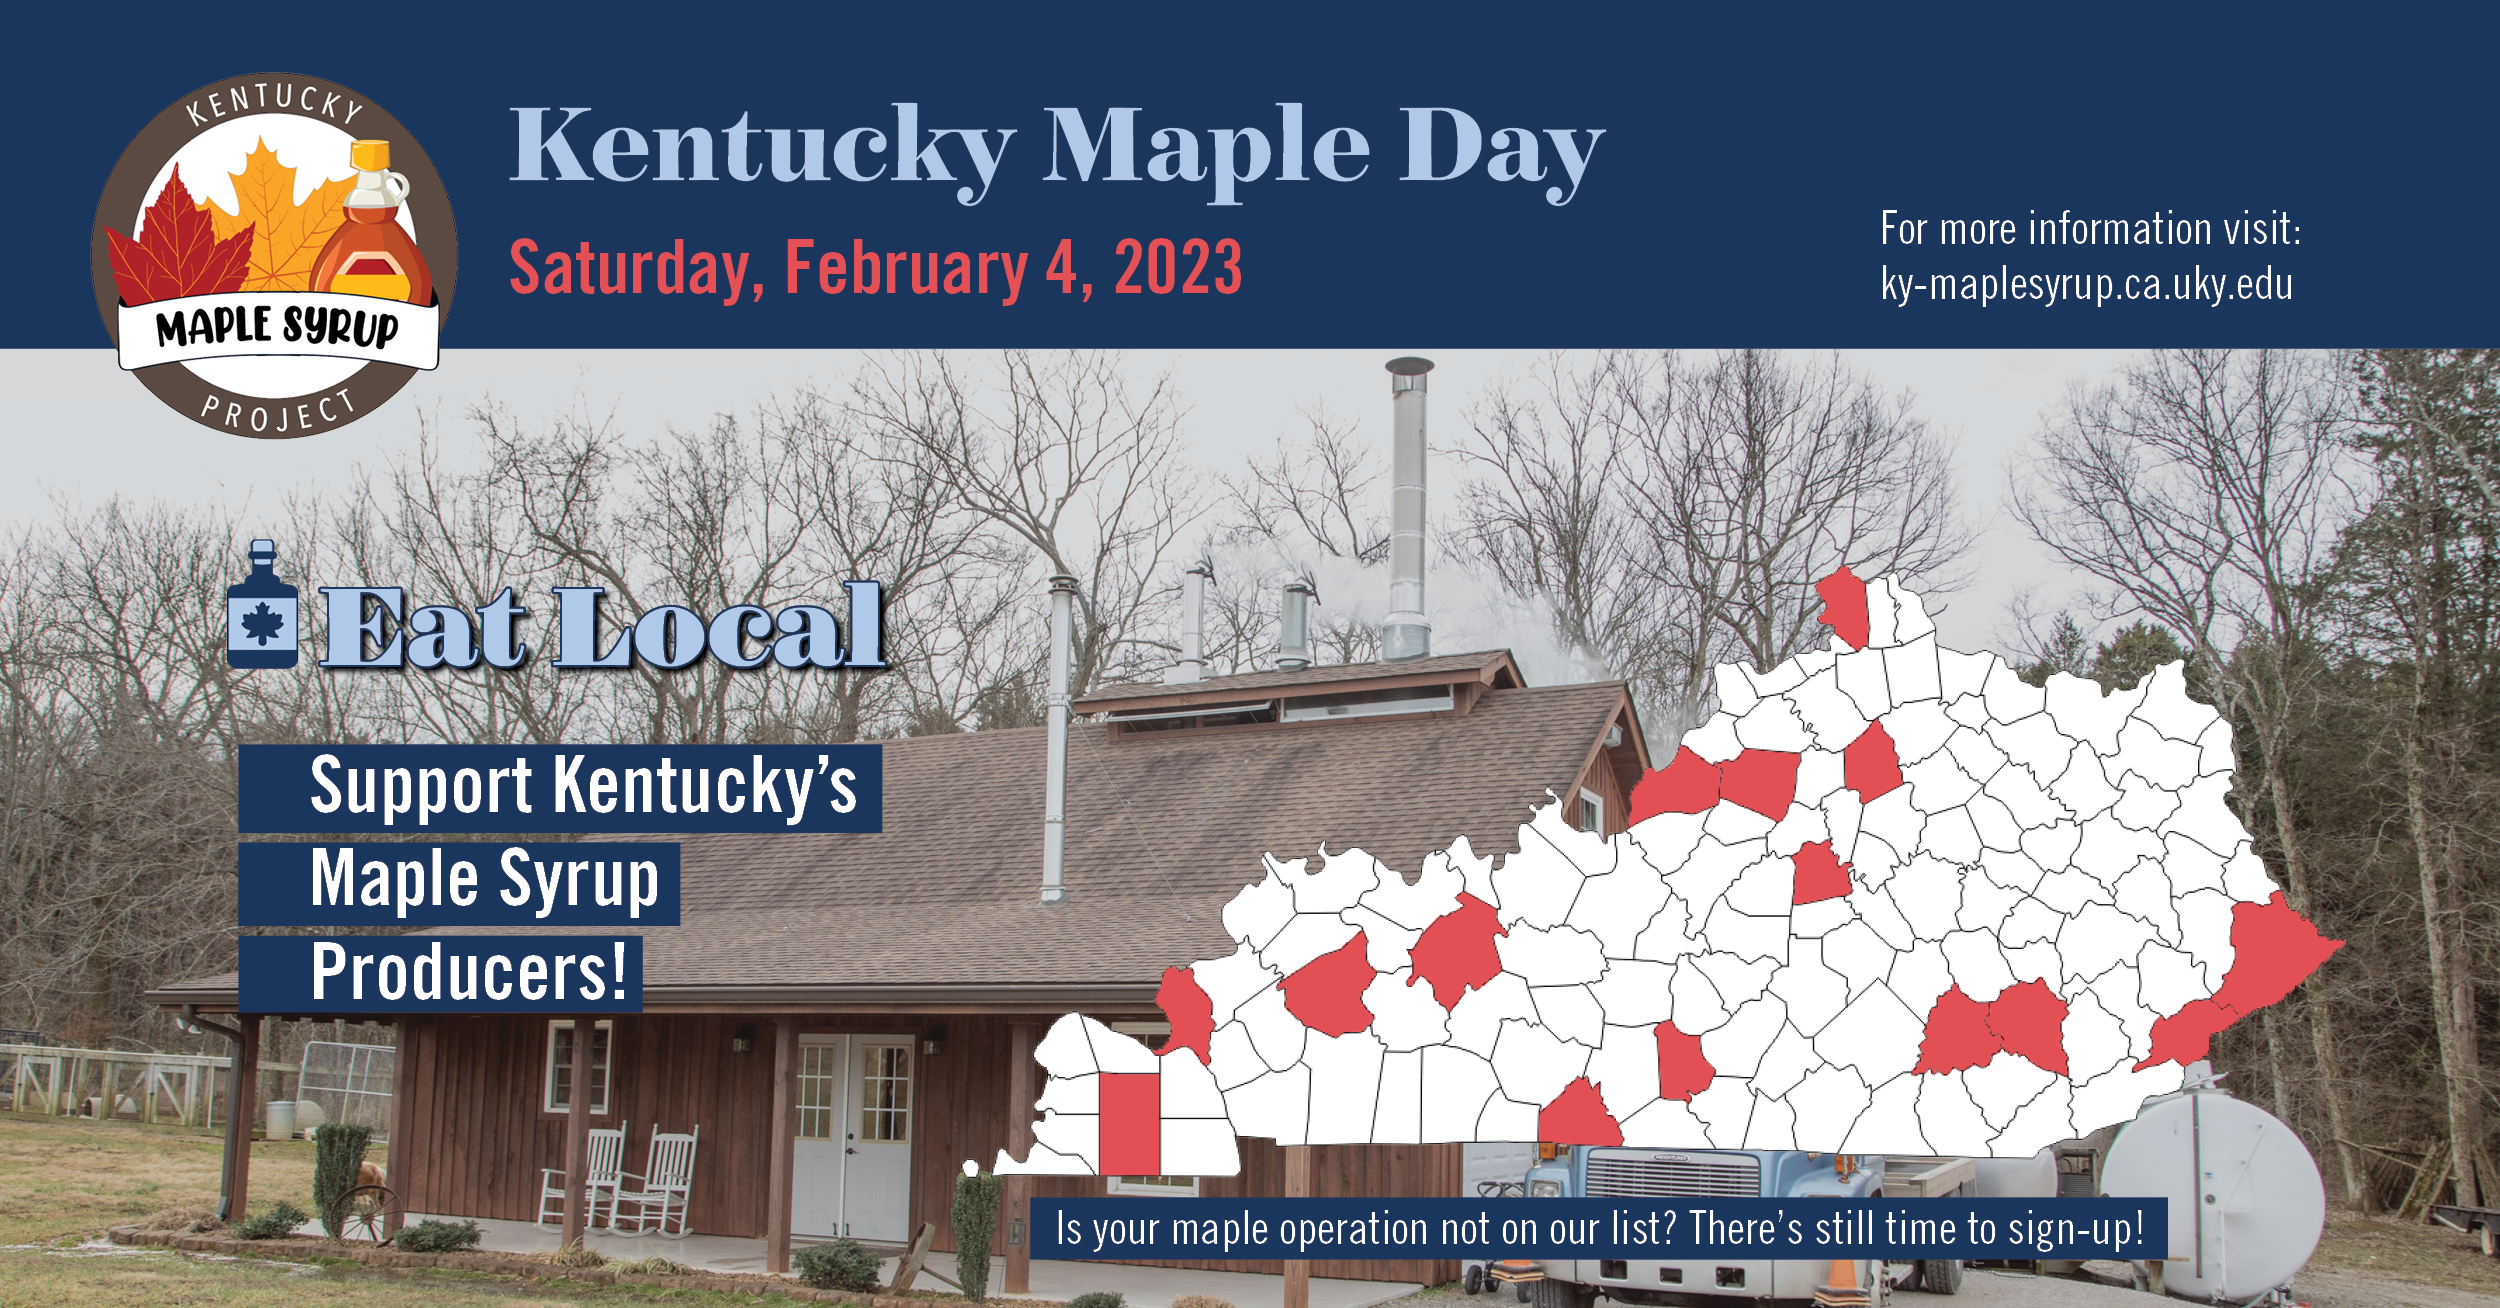 Kentucky Maple Day will be on Saturday, February 4th from 9 am – 5 pm at Jimmie Sizemore’s Farm (Sarvis Fork Sugar Bush) located at 591 Sarvis Branch Rd in Manchester, KY. Kentucky Maple Day is a celebration and educational event all rolled into one. Products available: maple syrup, maple candy and maple coated nuts. For more information visit: https://ky-maplesyrup.ca.uky.edu/ky-maple-day